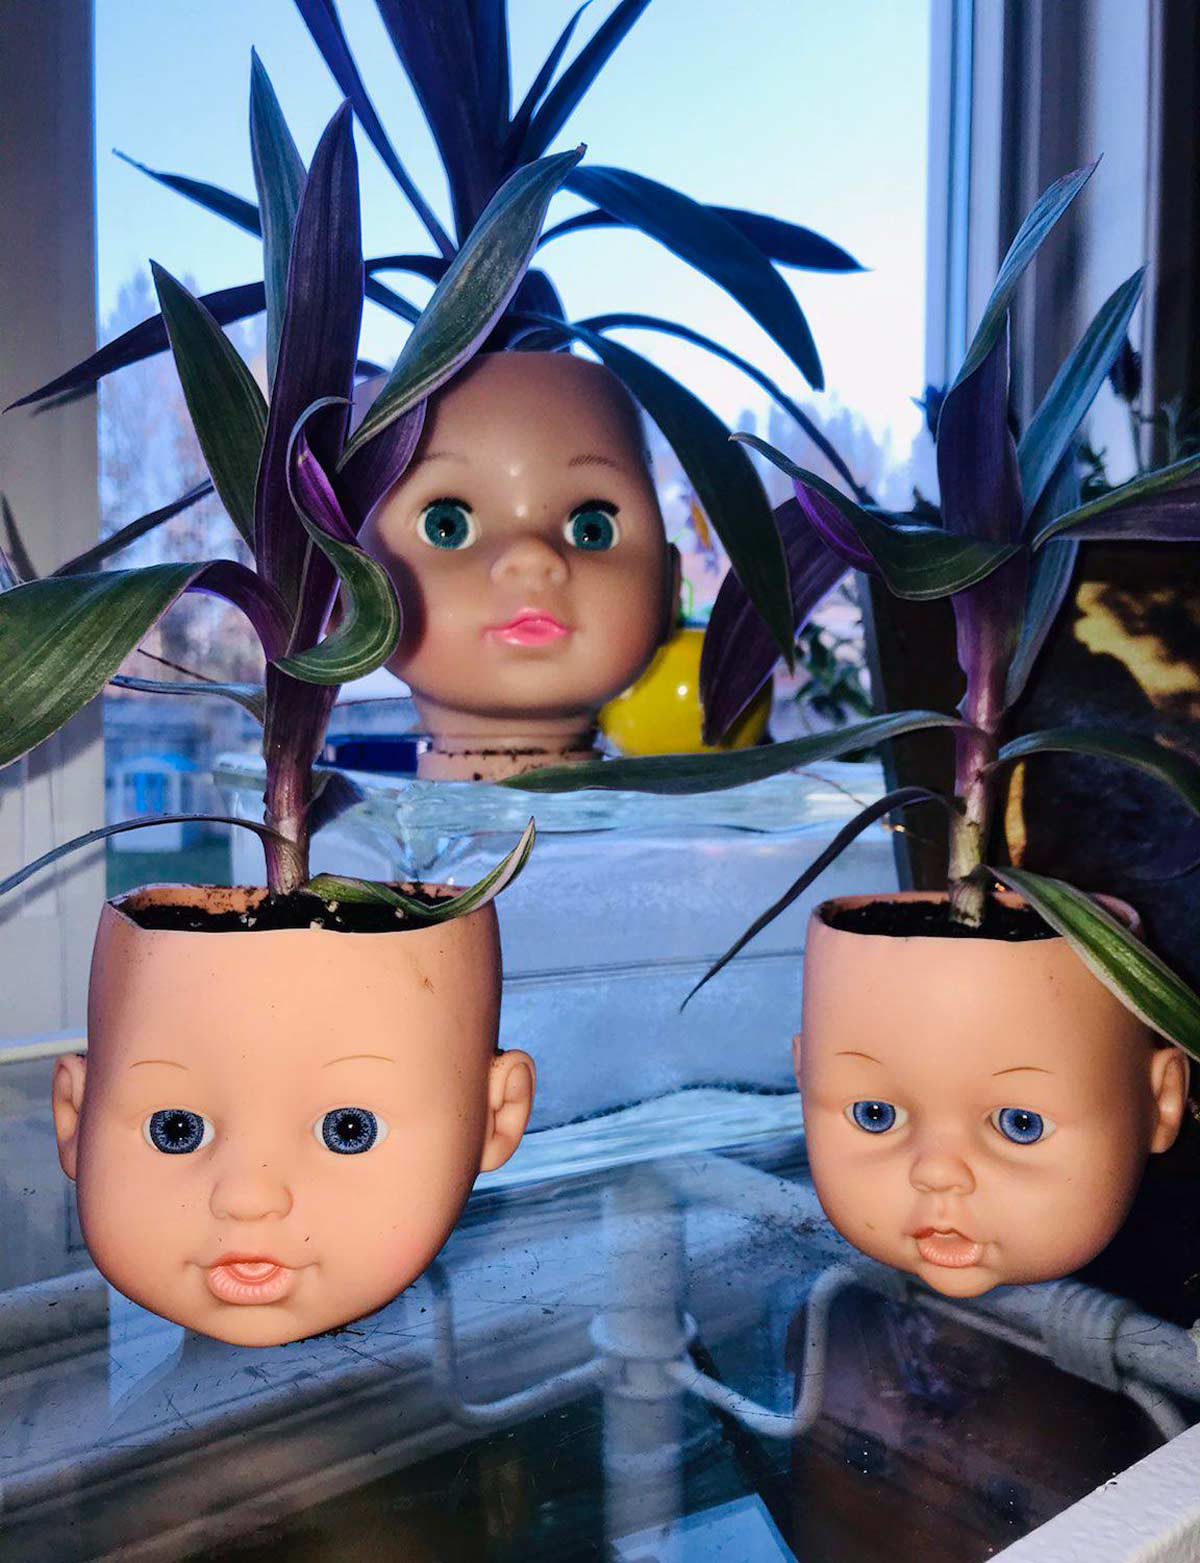 My neighbor repurposed her daughter's doll heads as planters